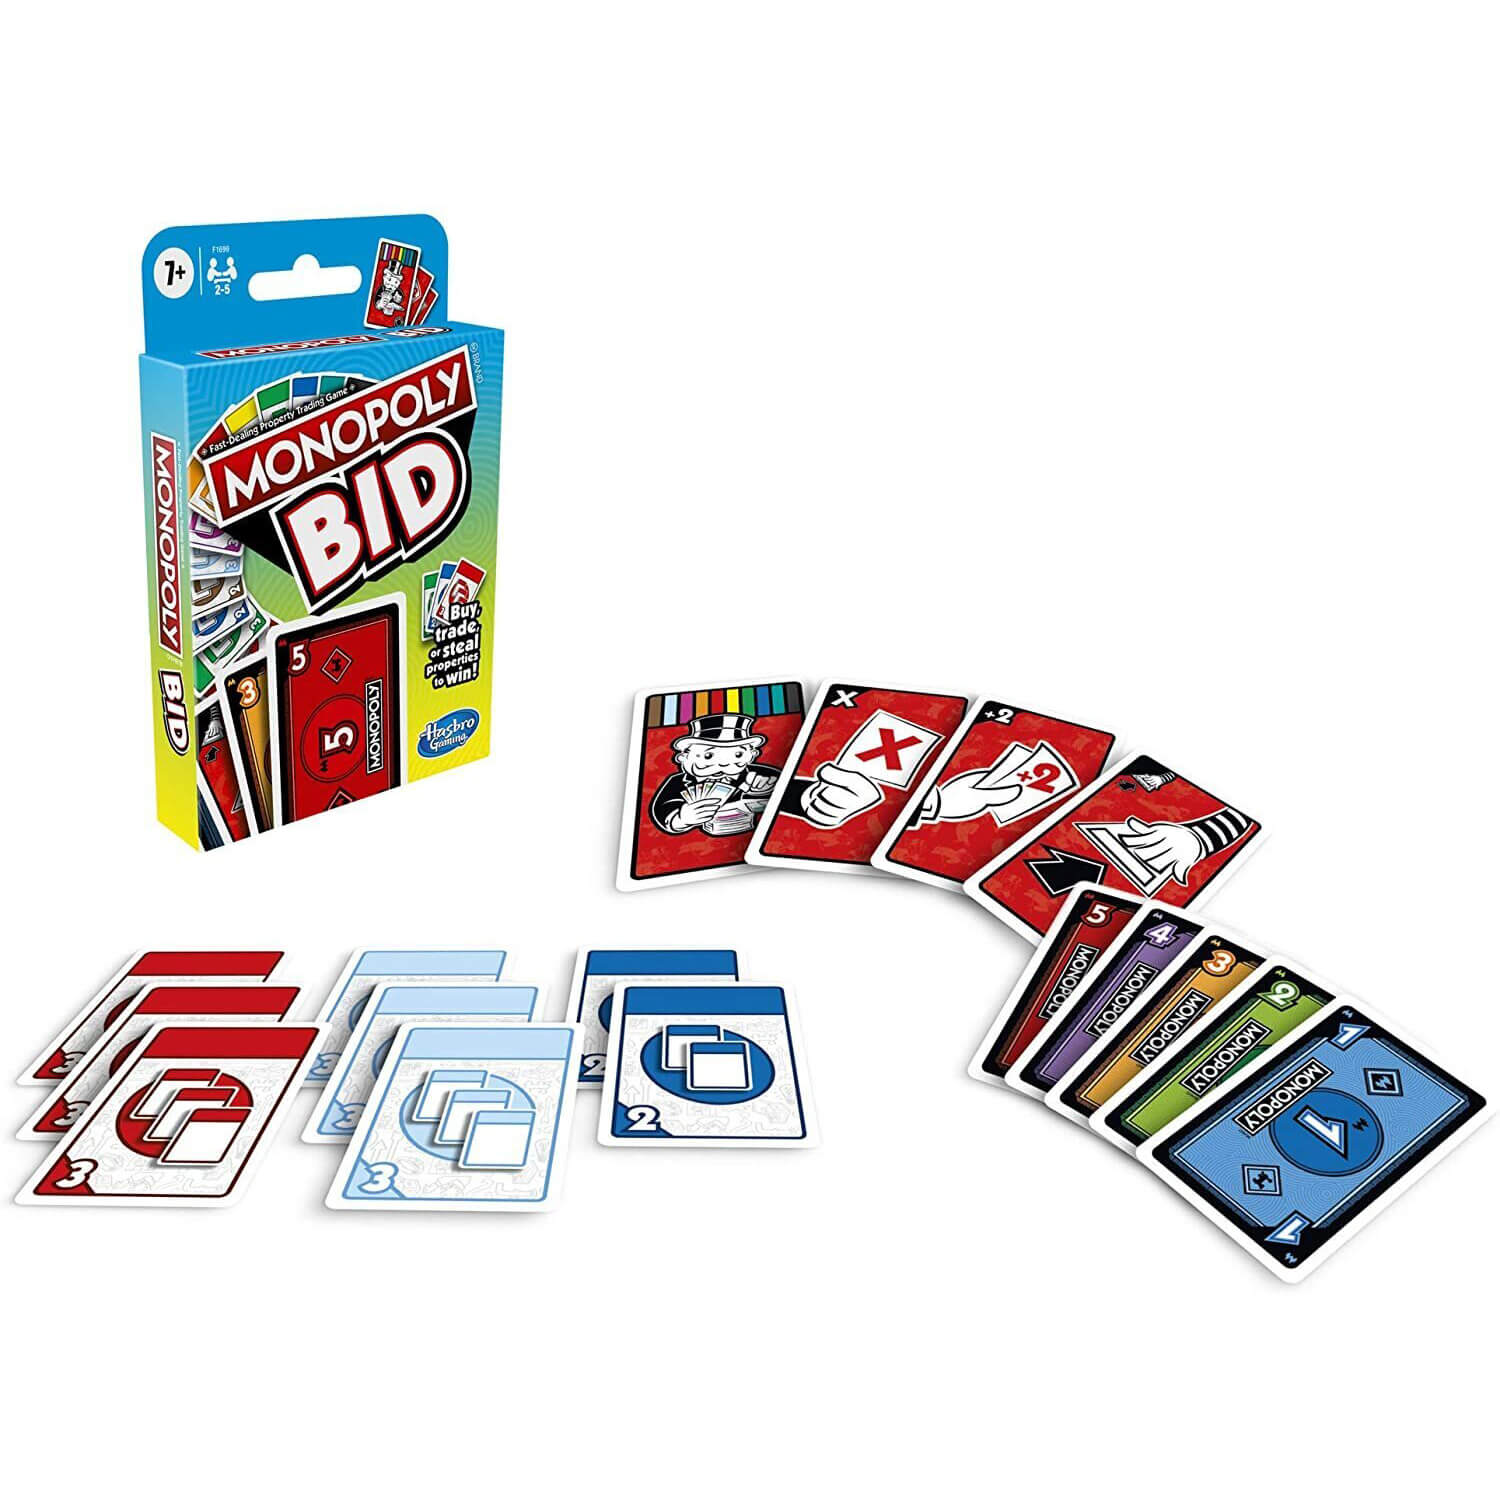 Monopoly Bid Card Game cards and package